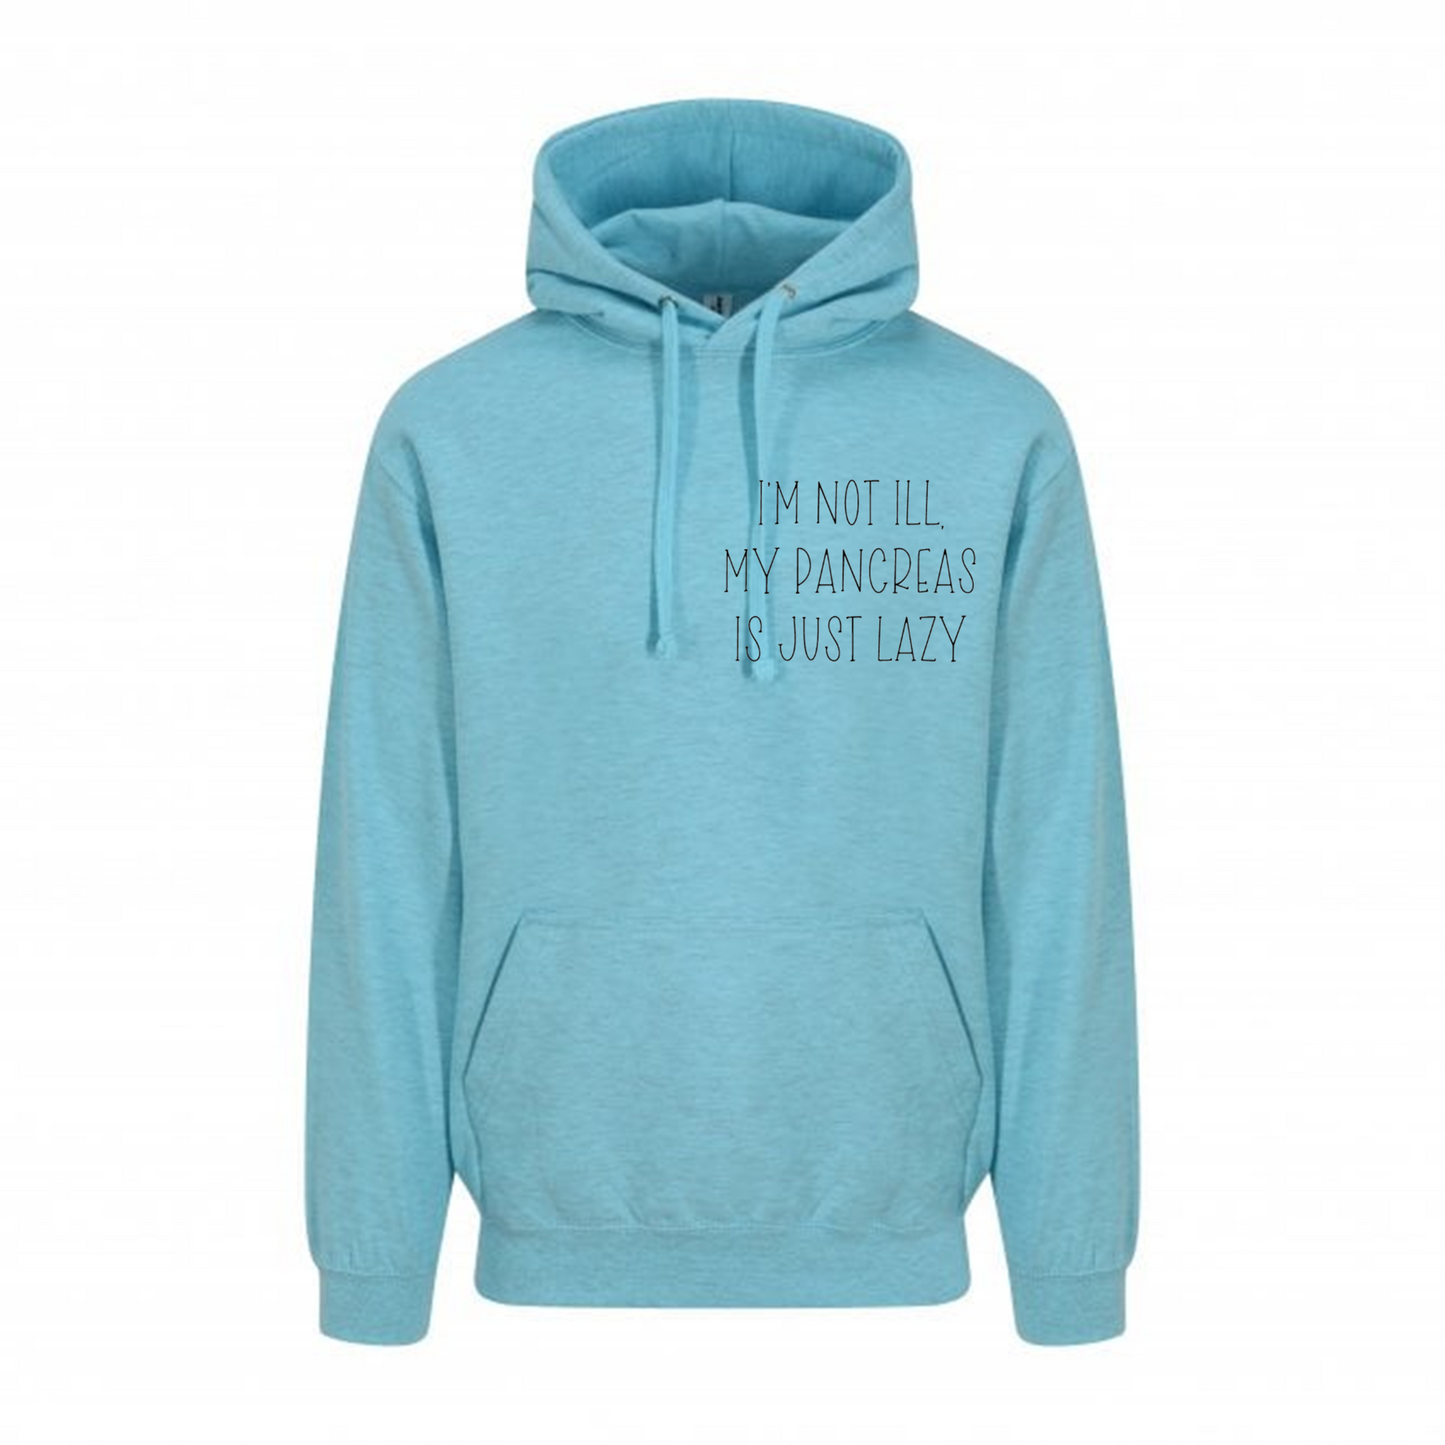 I'm Not Ill, My Pancreas Is Just Lazy Pastel Hoodie